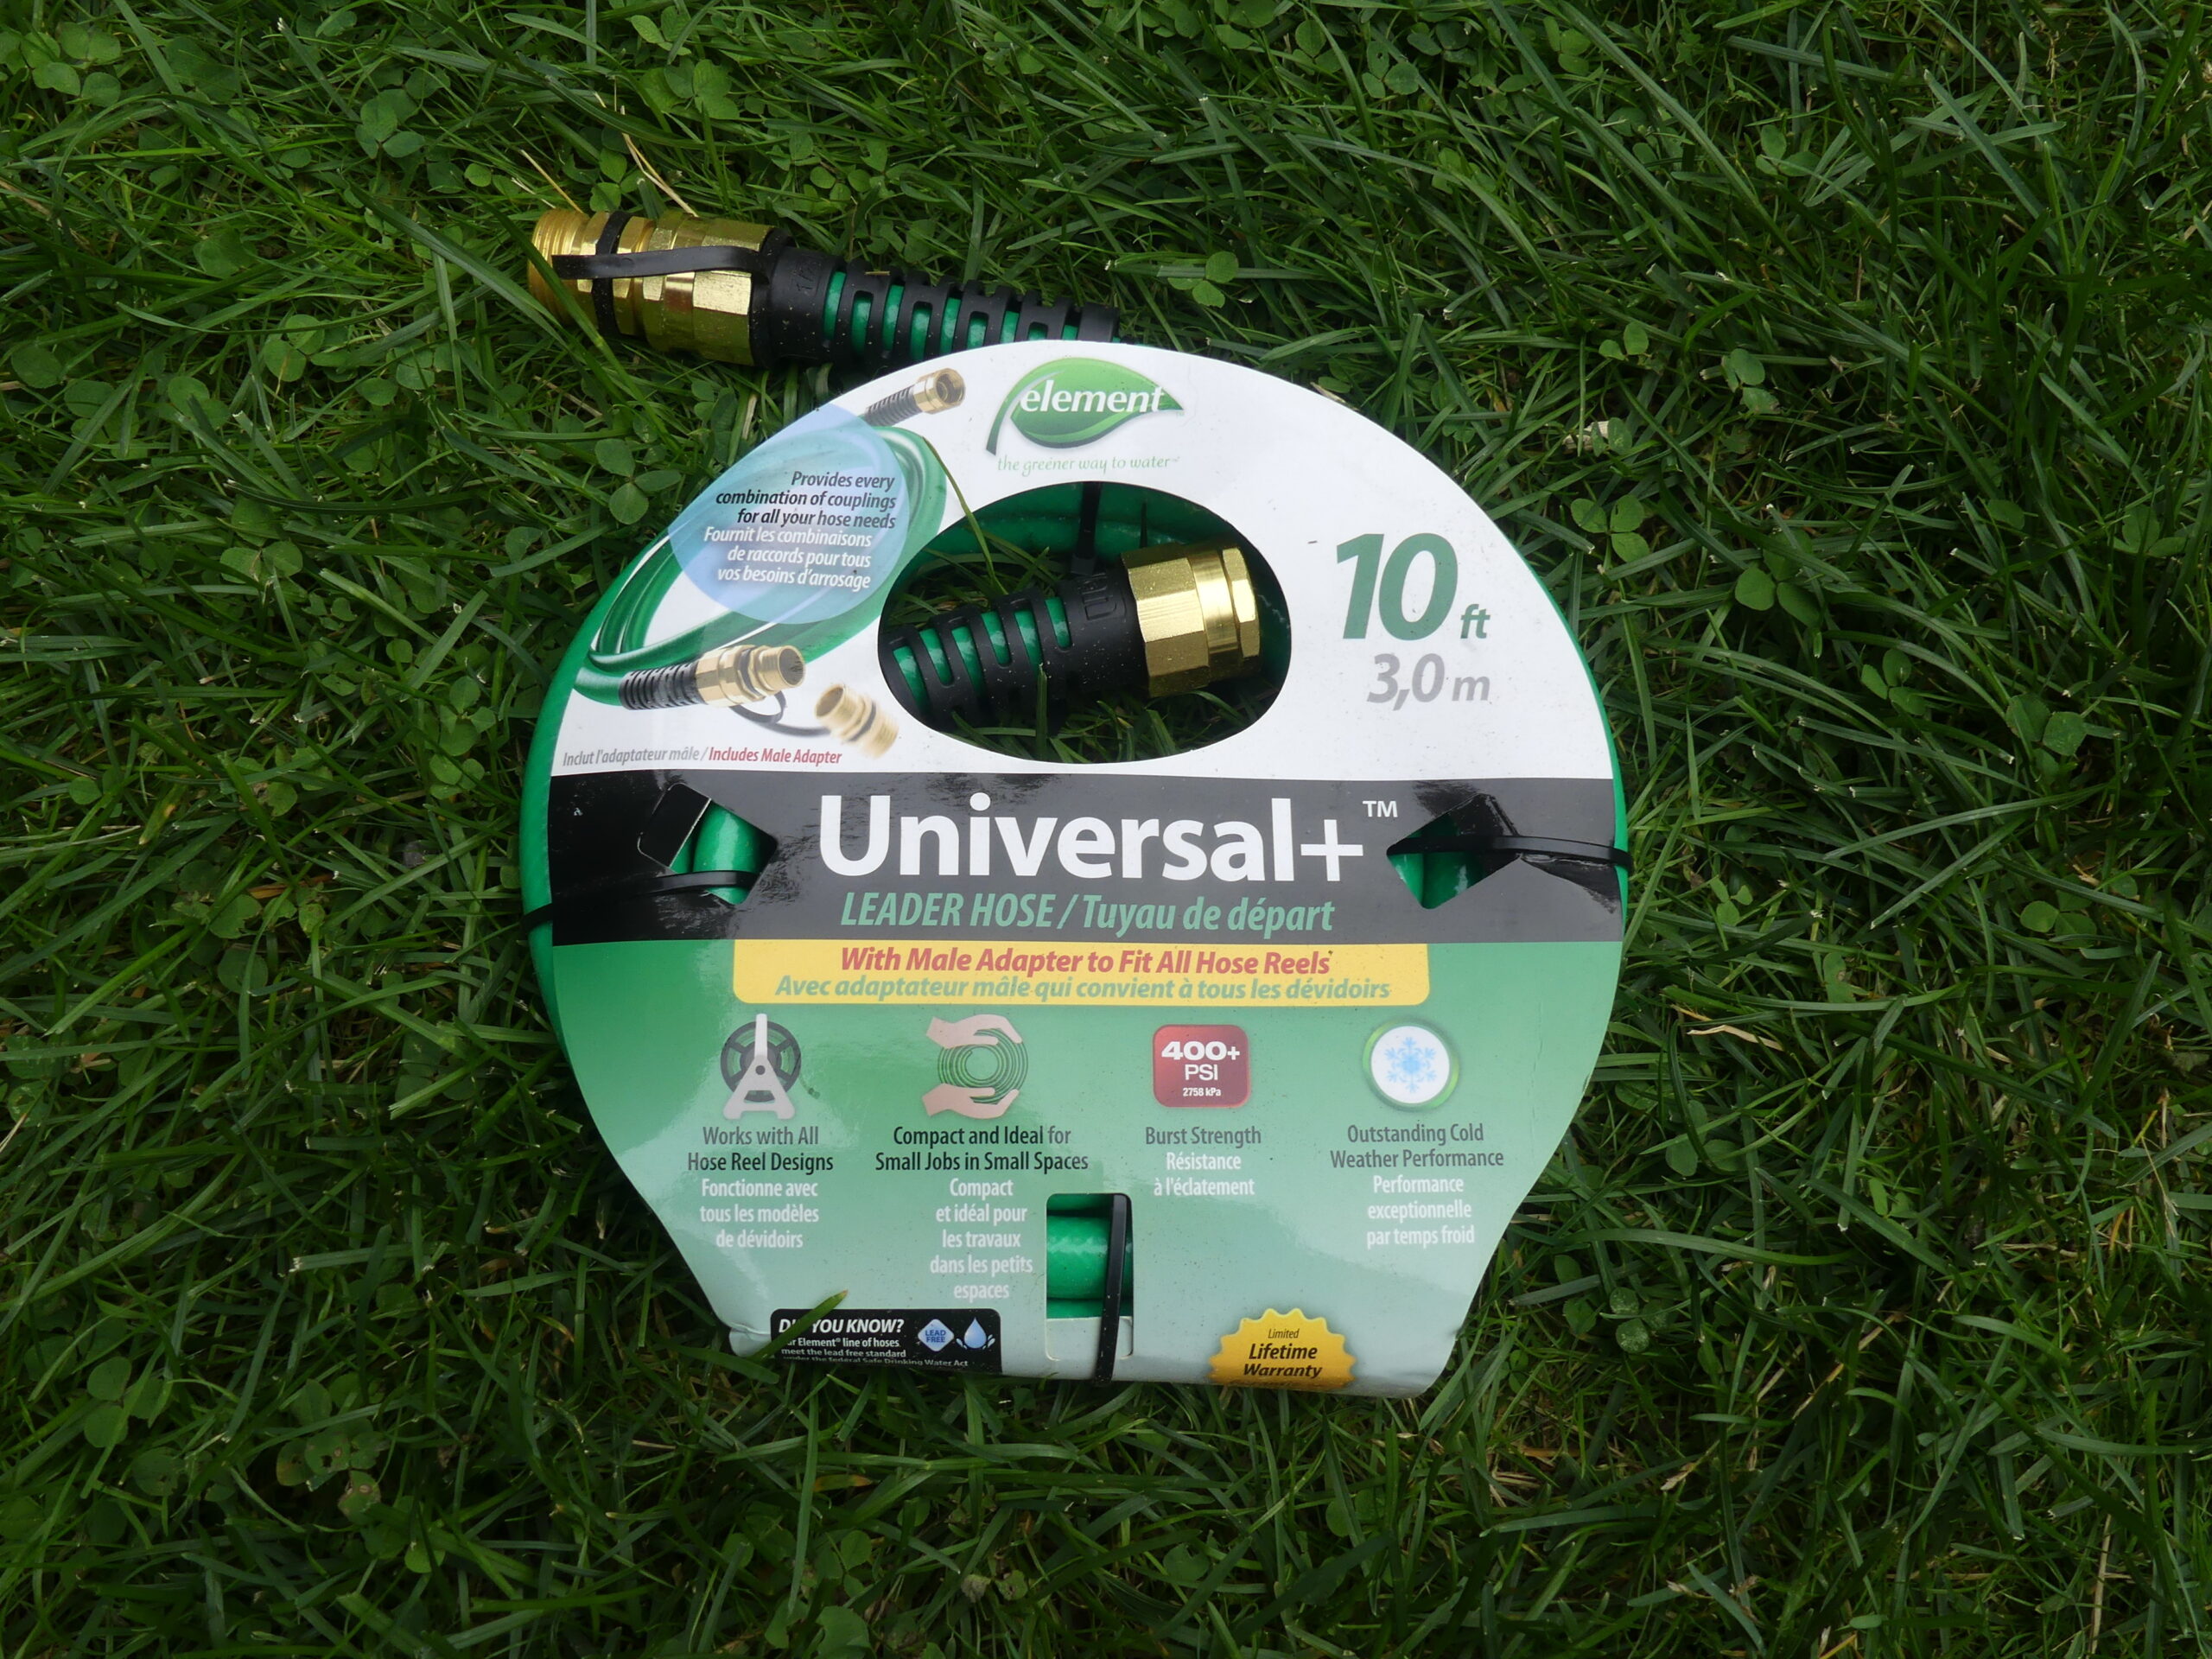 Under the Element brand, this 10-foot hose bib leader hose seemed like a good idea.  The underside of the package revealed that it was a Swan product, but the tiny print was seen too late. ANDREW MESSINGER